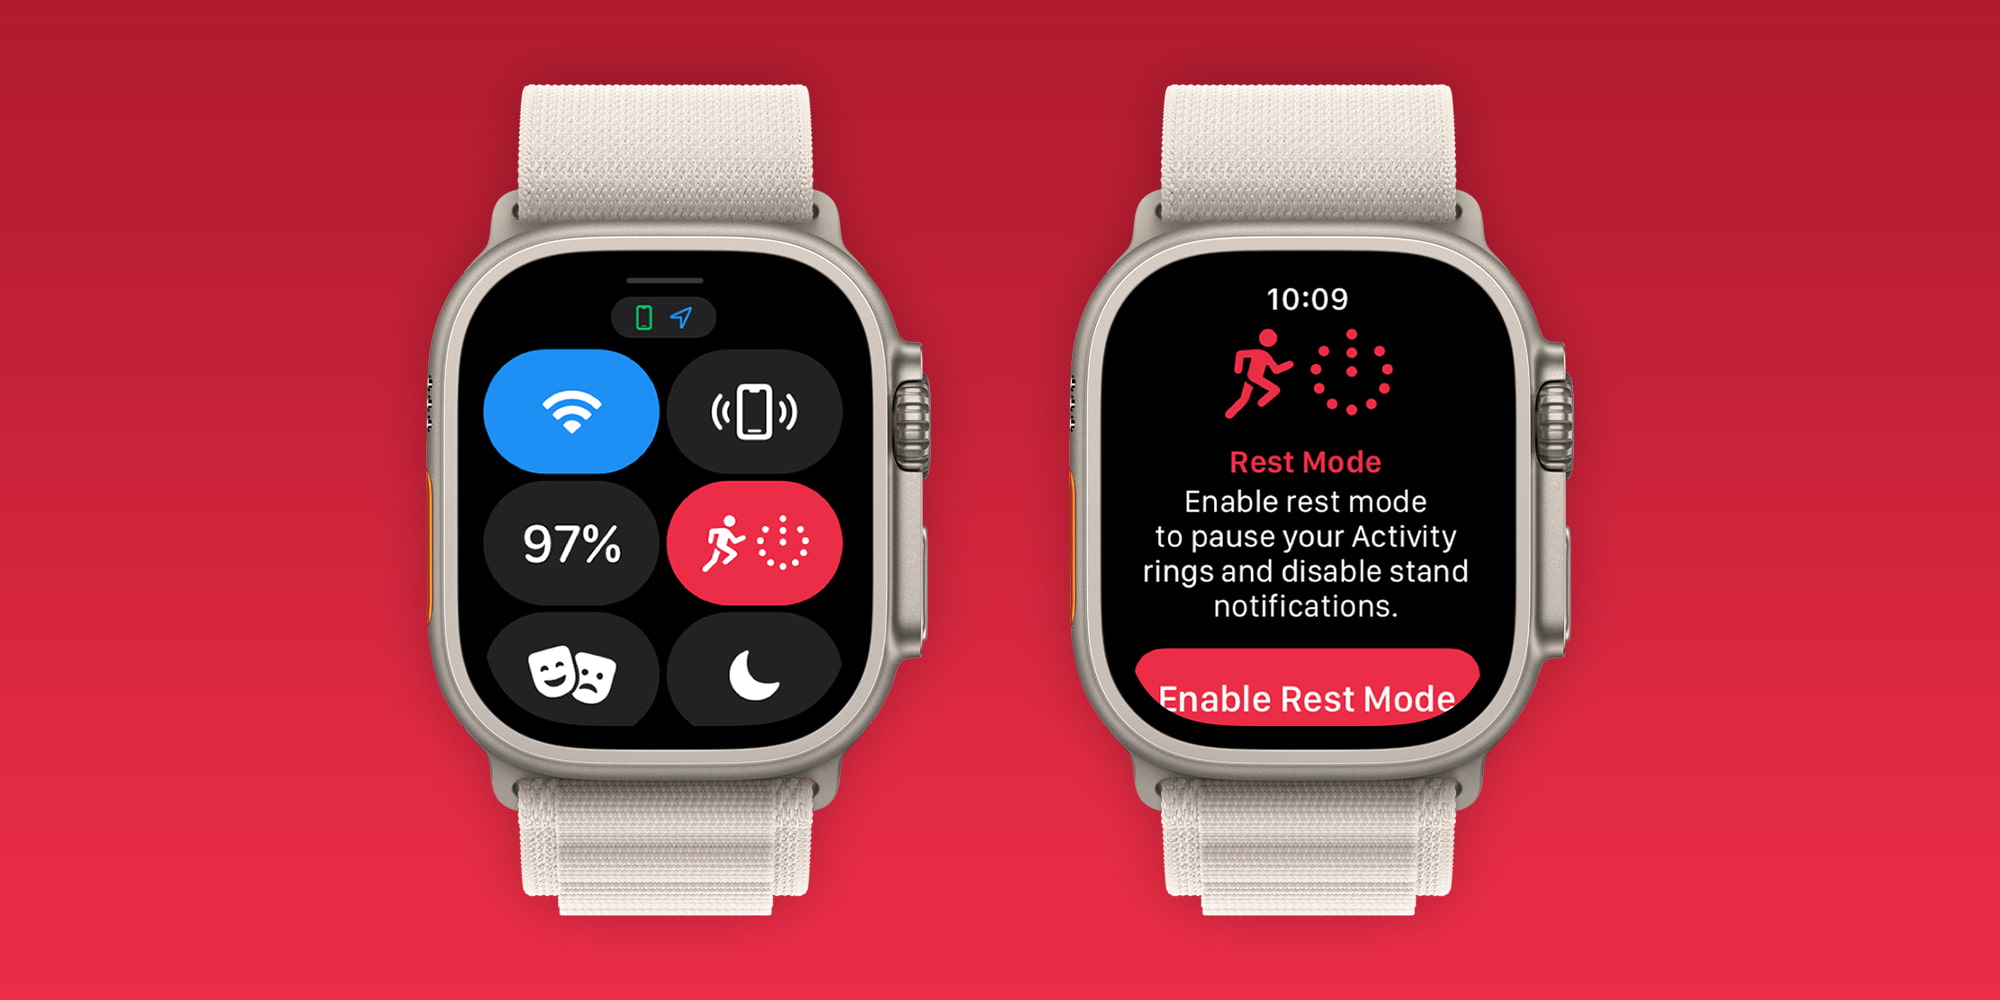 Introducing watchOS 10, a milestone update for Apple Watch - Apple (IN)